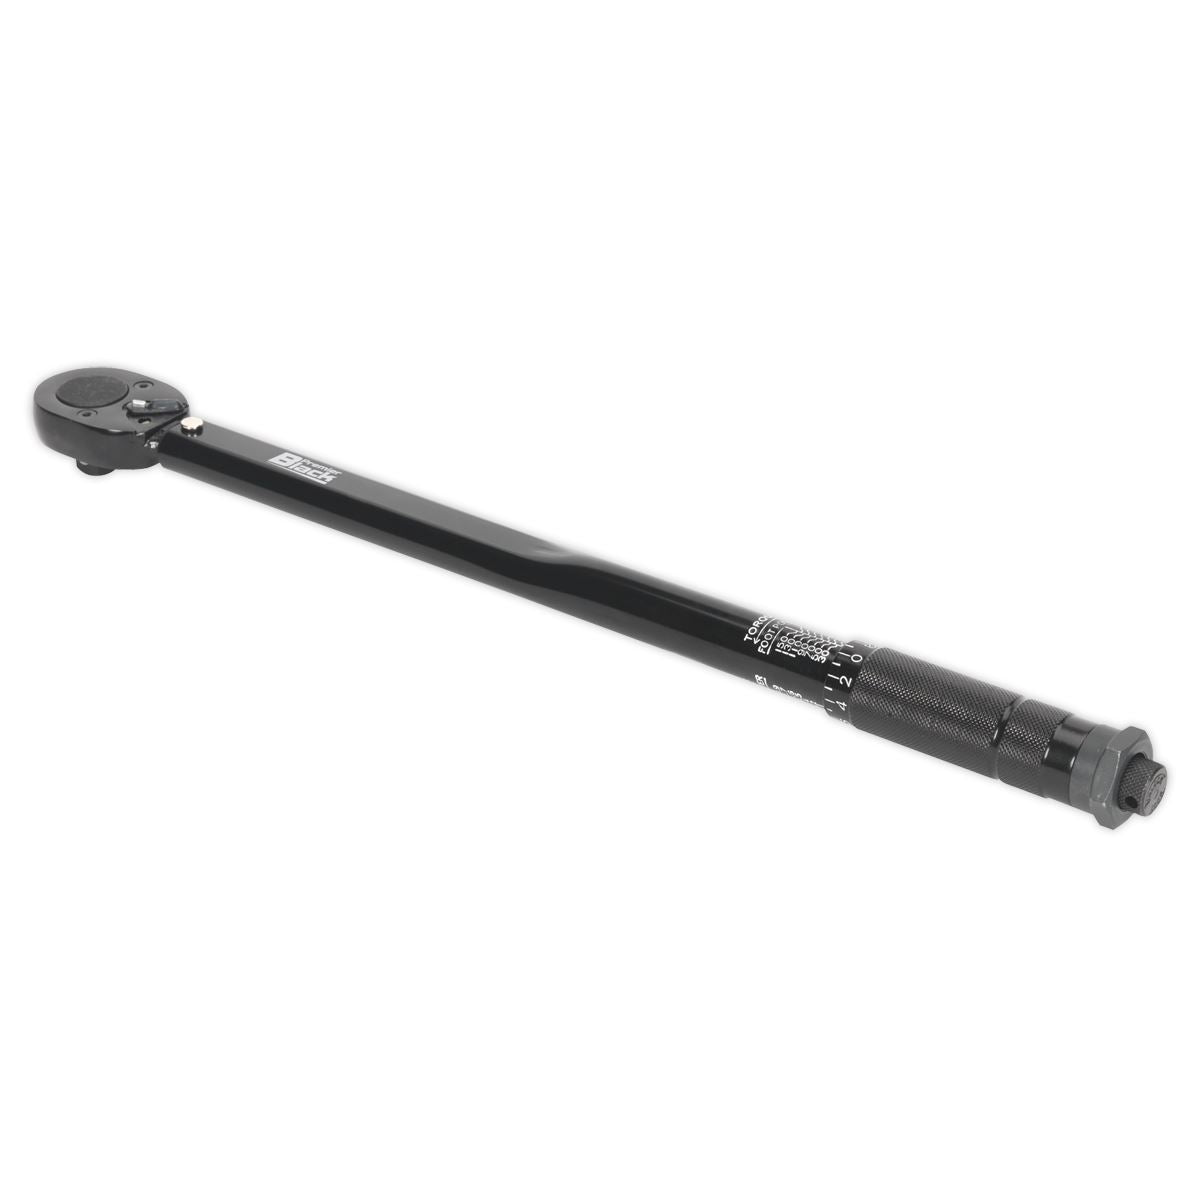 Sealey Premier Black 1/2" Drive Calibrated Micrometer Torque Wrench 27-204Nm